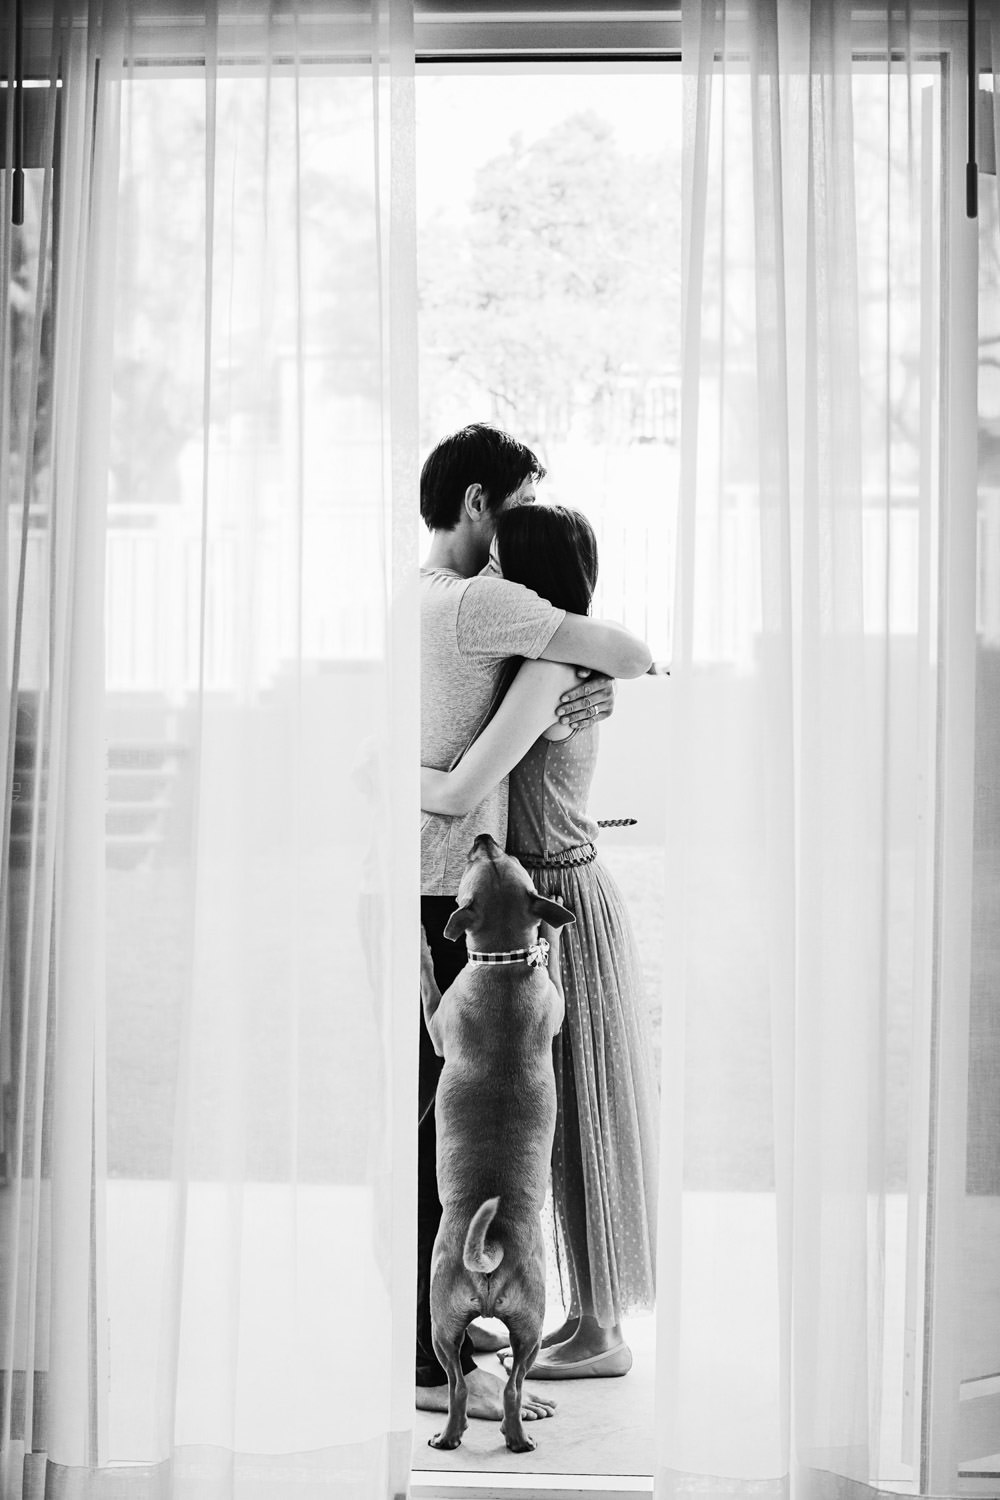 engagement at home with dog- Honest,natural, fun, romantic family-wedding-photography in brisbane queensland